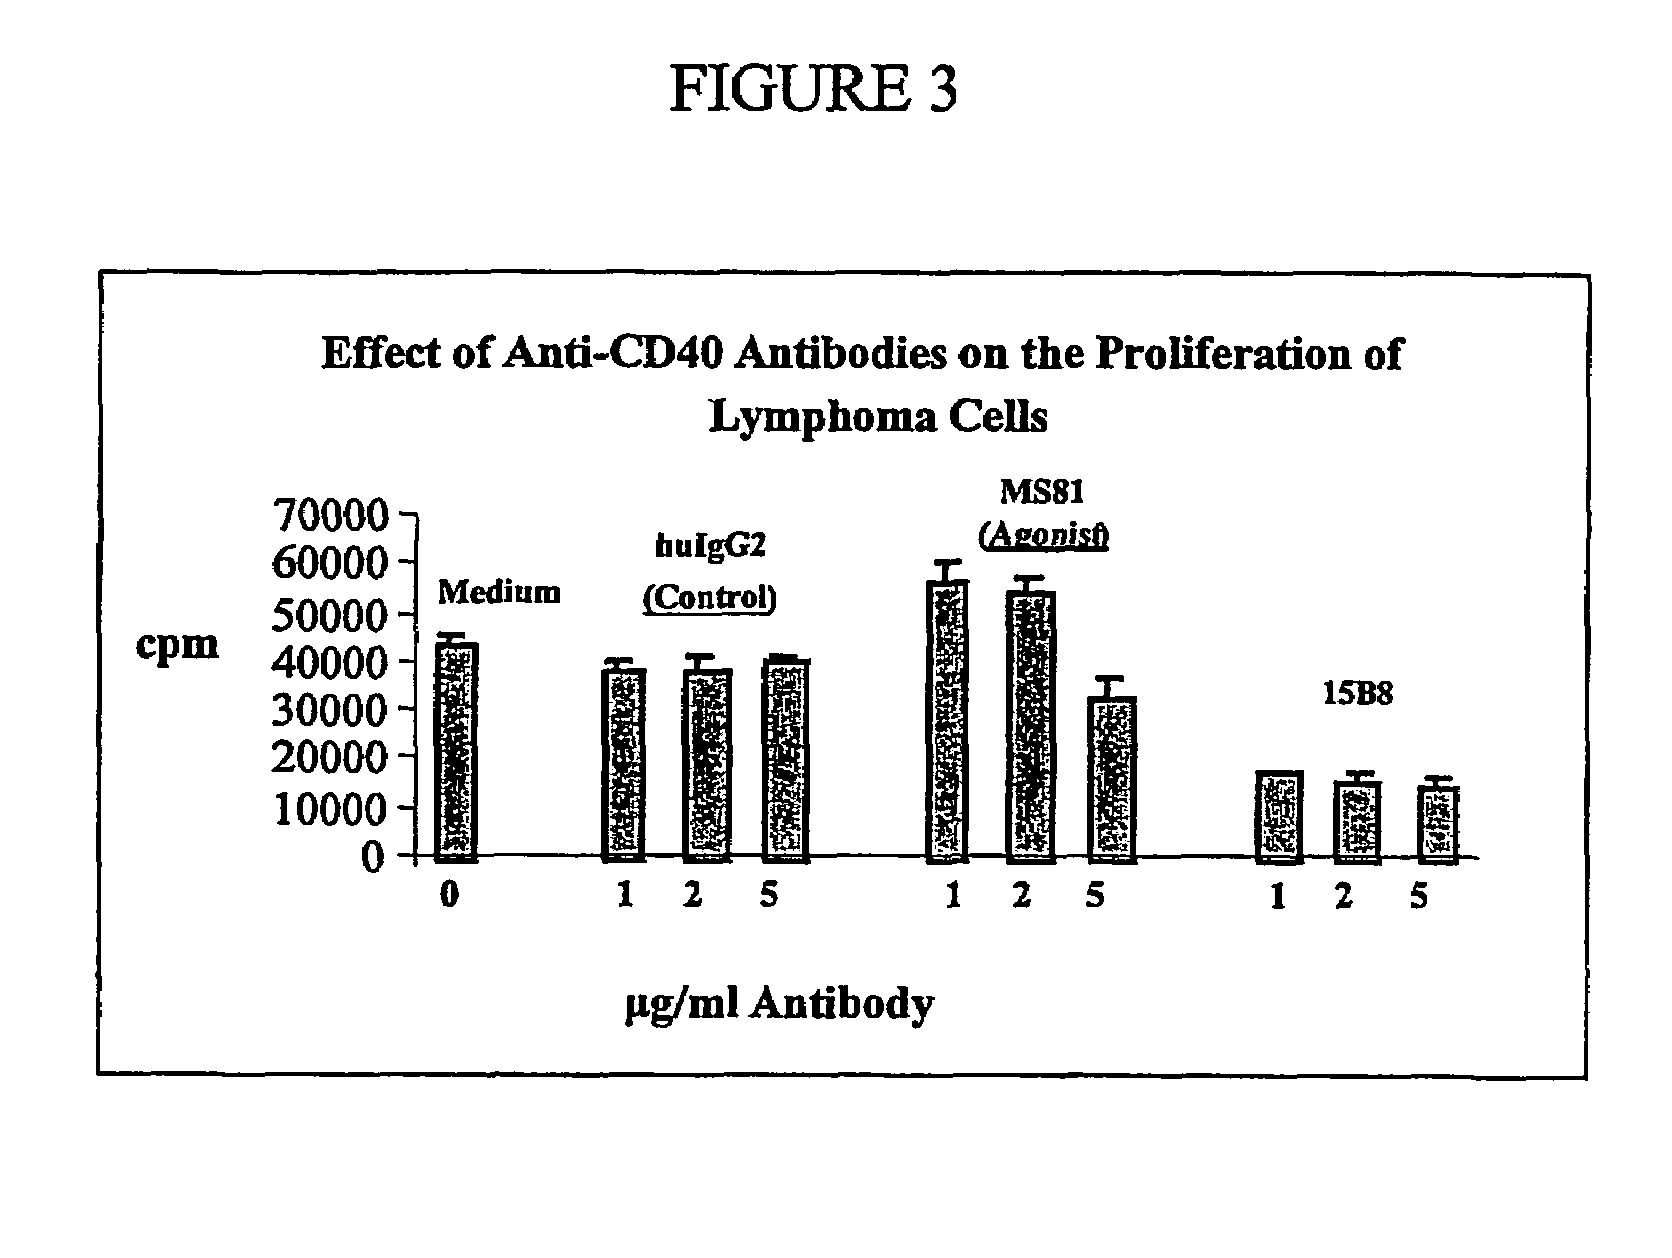 Methods of therapy for B-cell malignancies using antagonist anti-CD40 antibodies